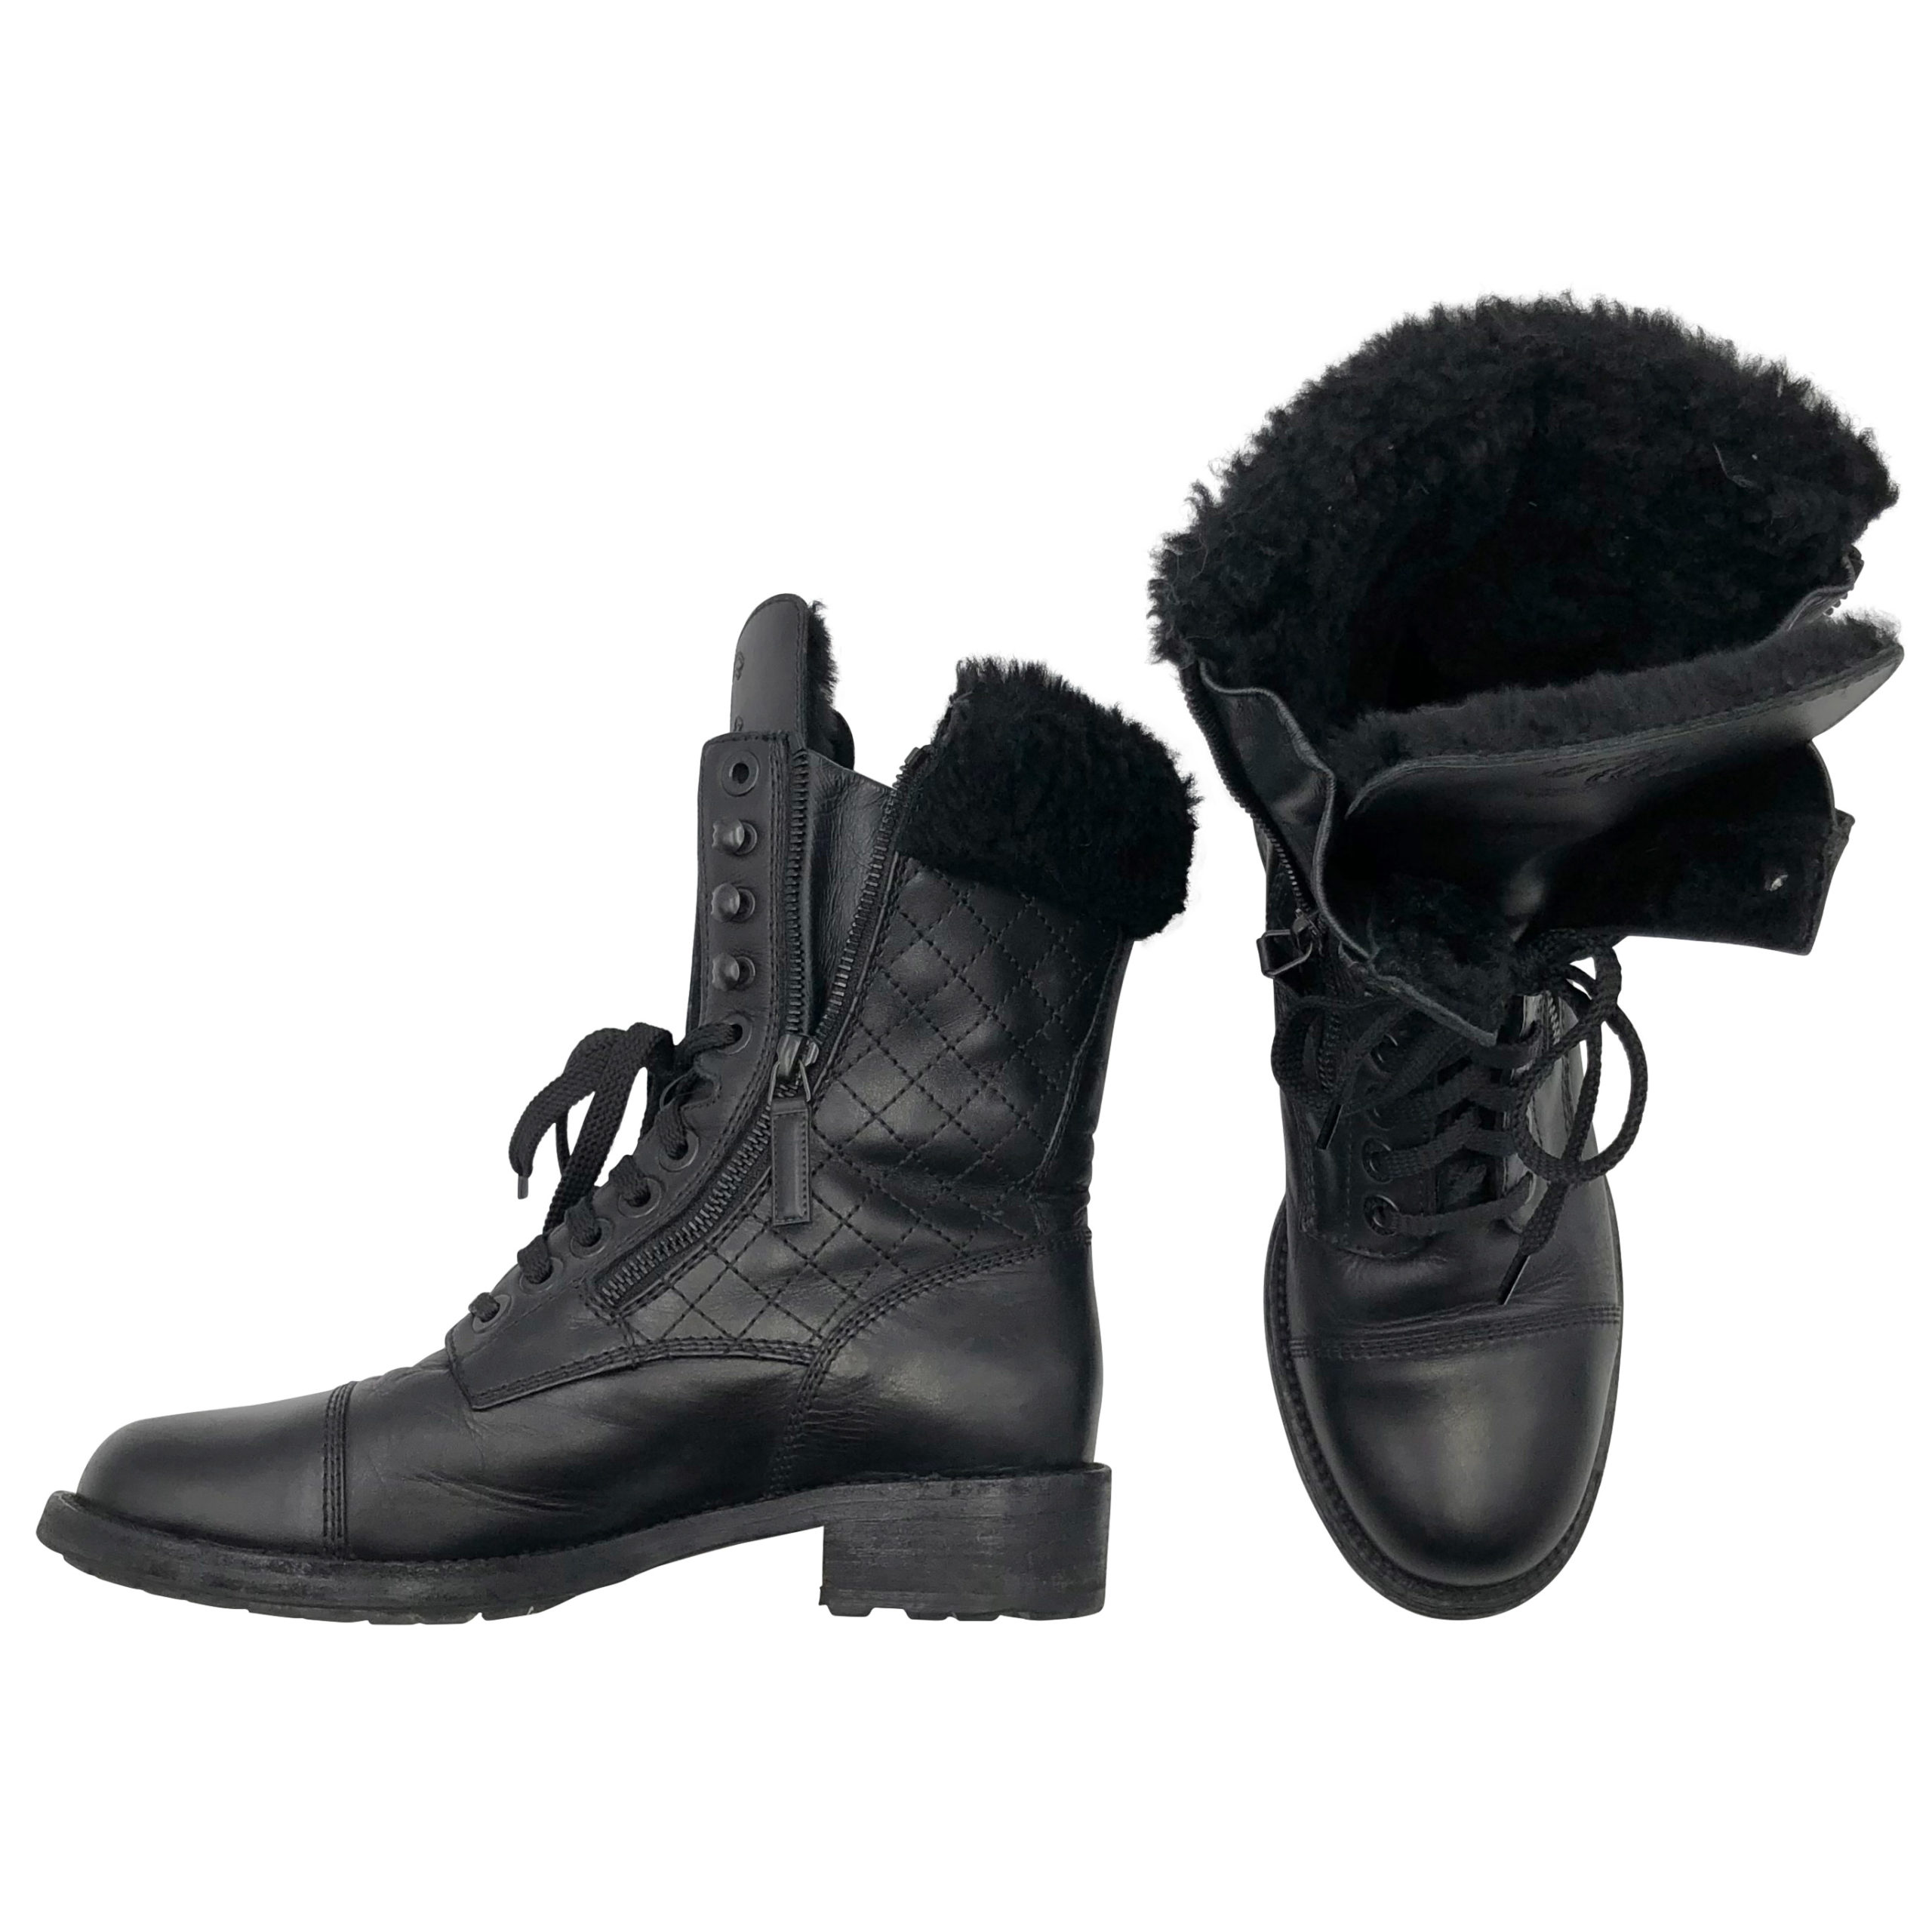 Chanel combat boots in black quilted leather with fur lining  DOWNTOWN  UPTOWN Genève